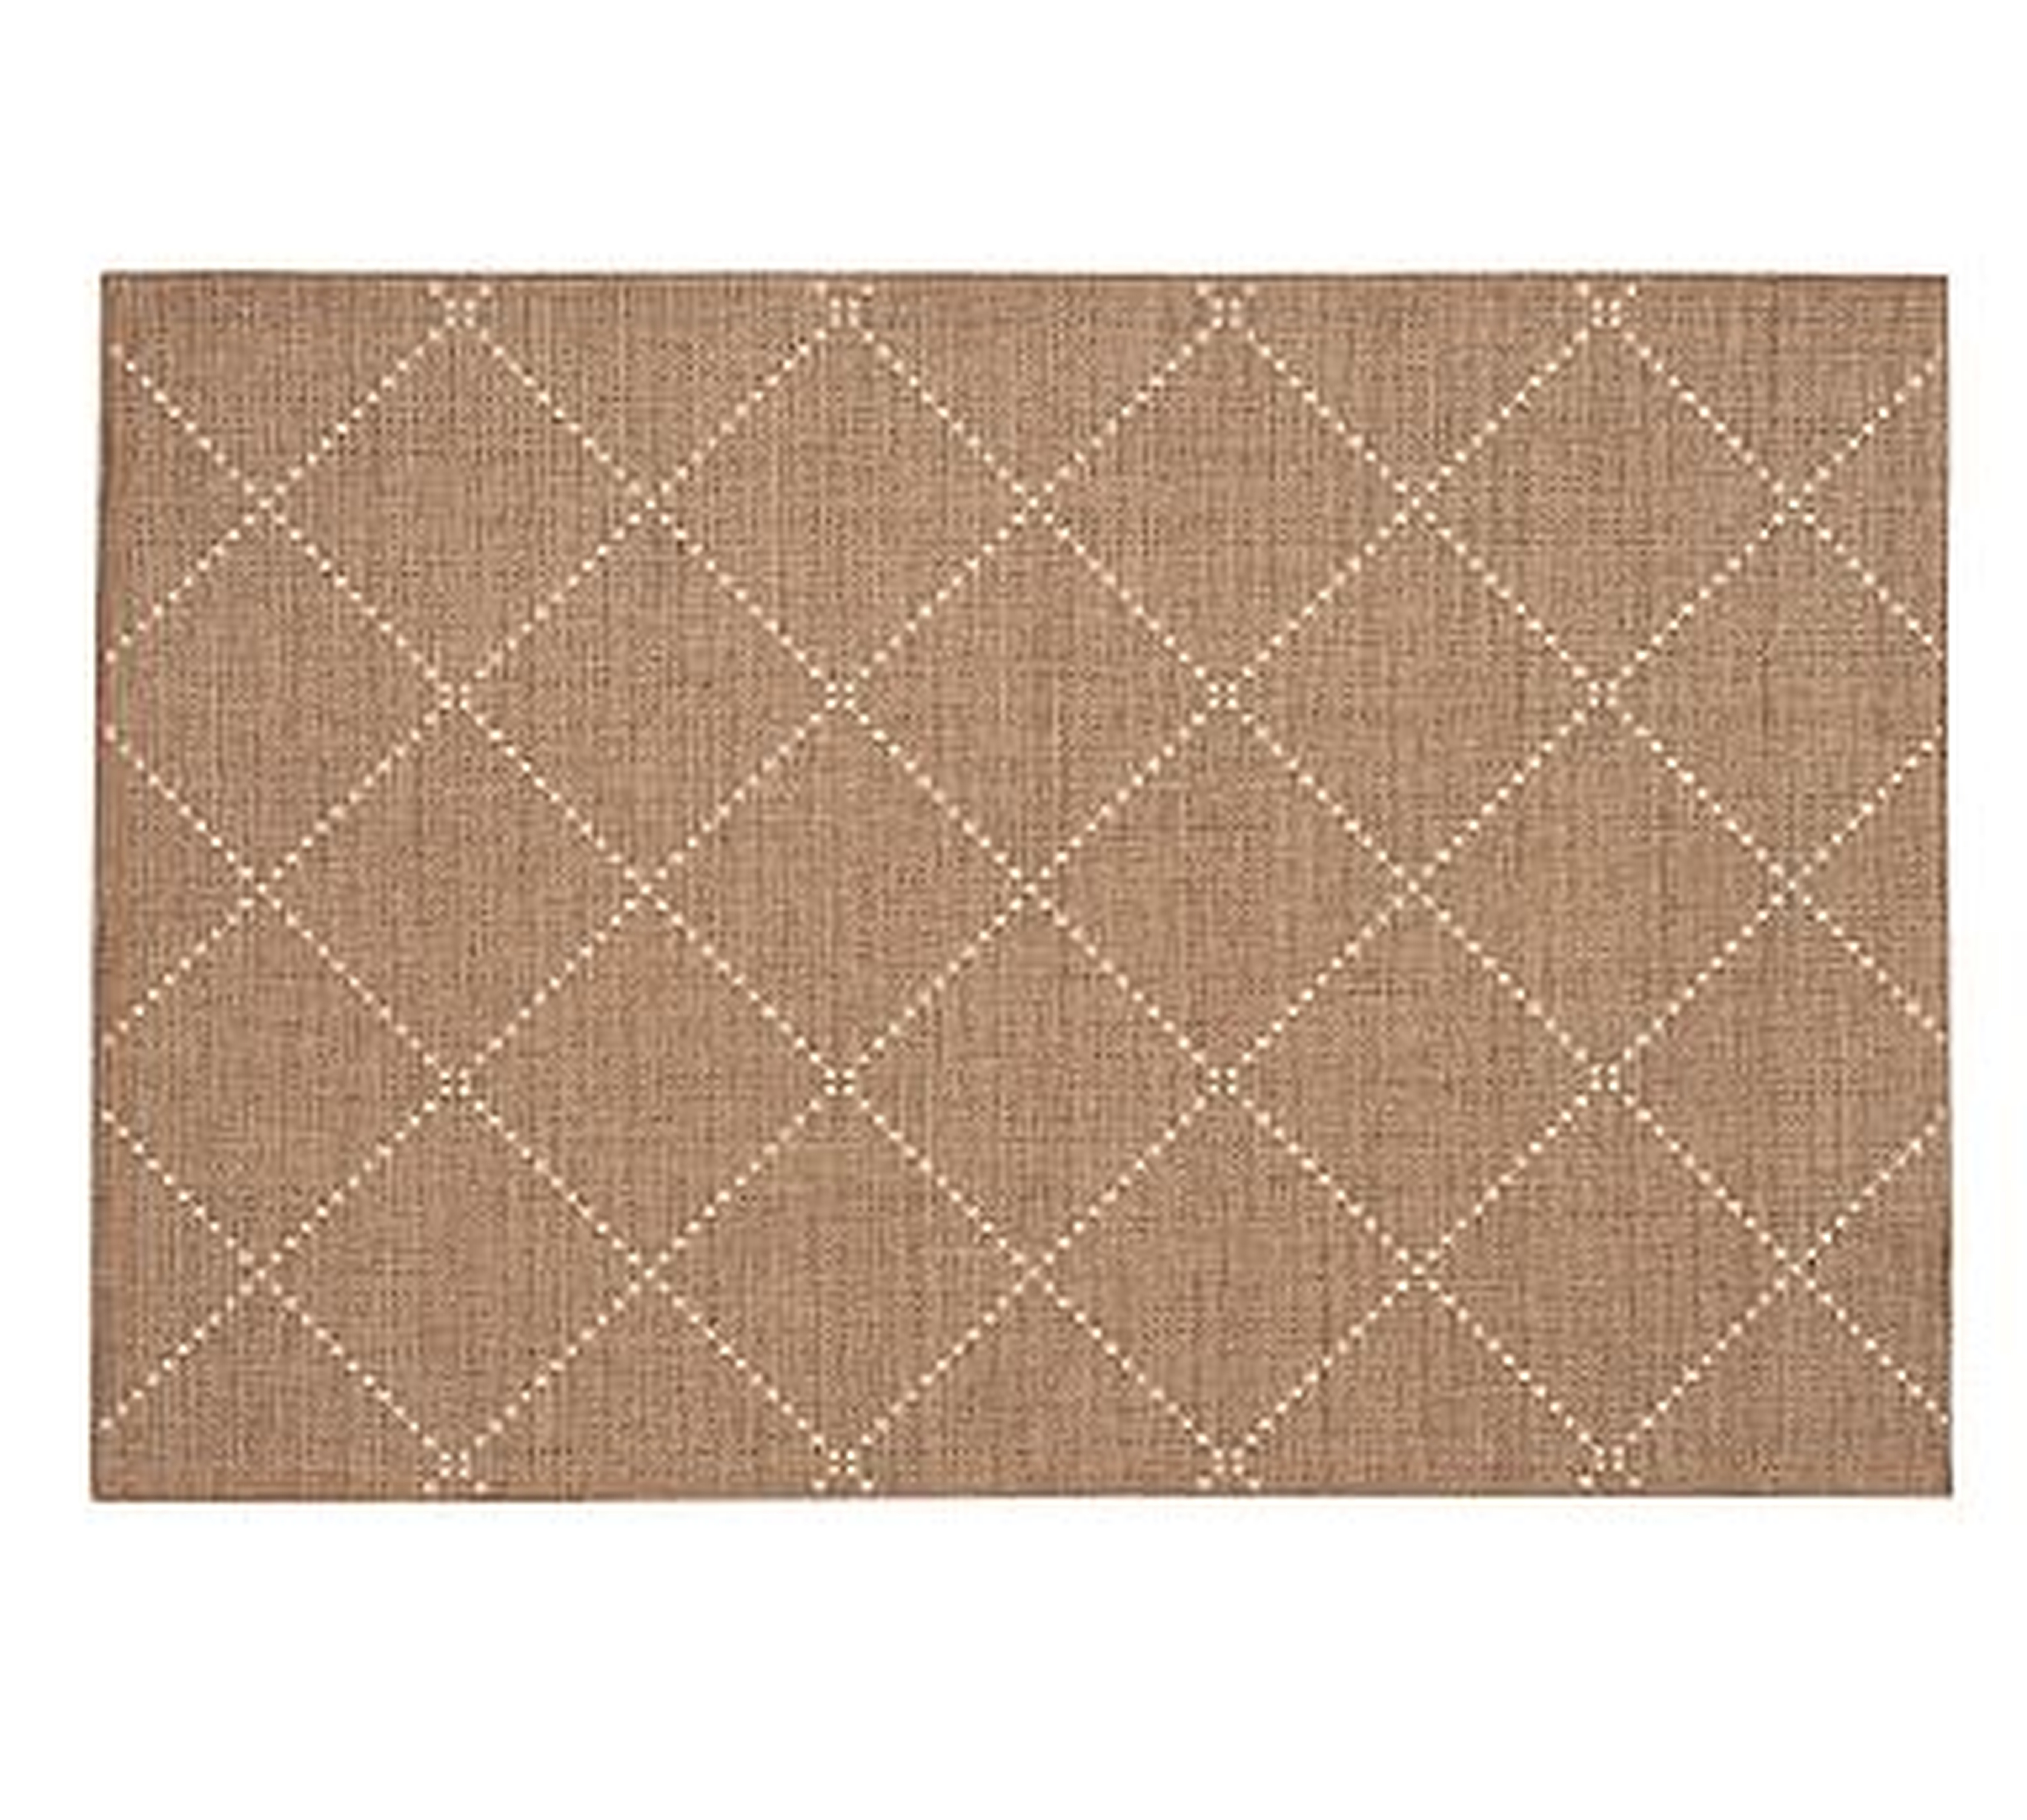 Joey Handwoven Outdoor Rug, 8 x 10', Earth/Natural - Pottery Barn